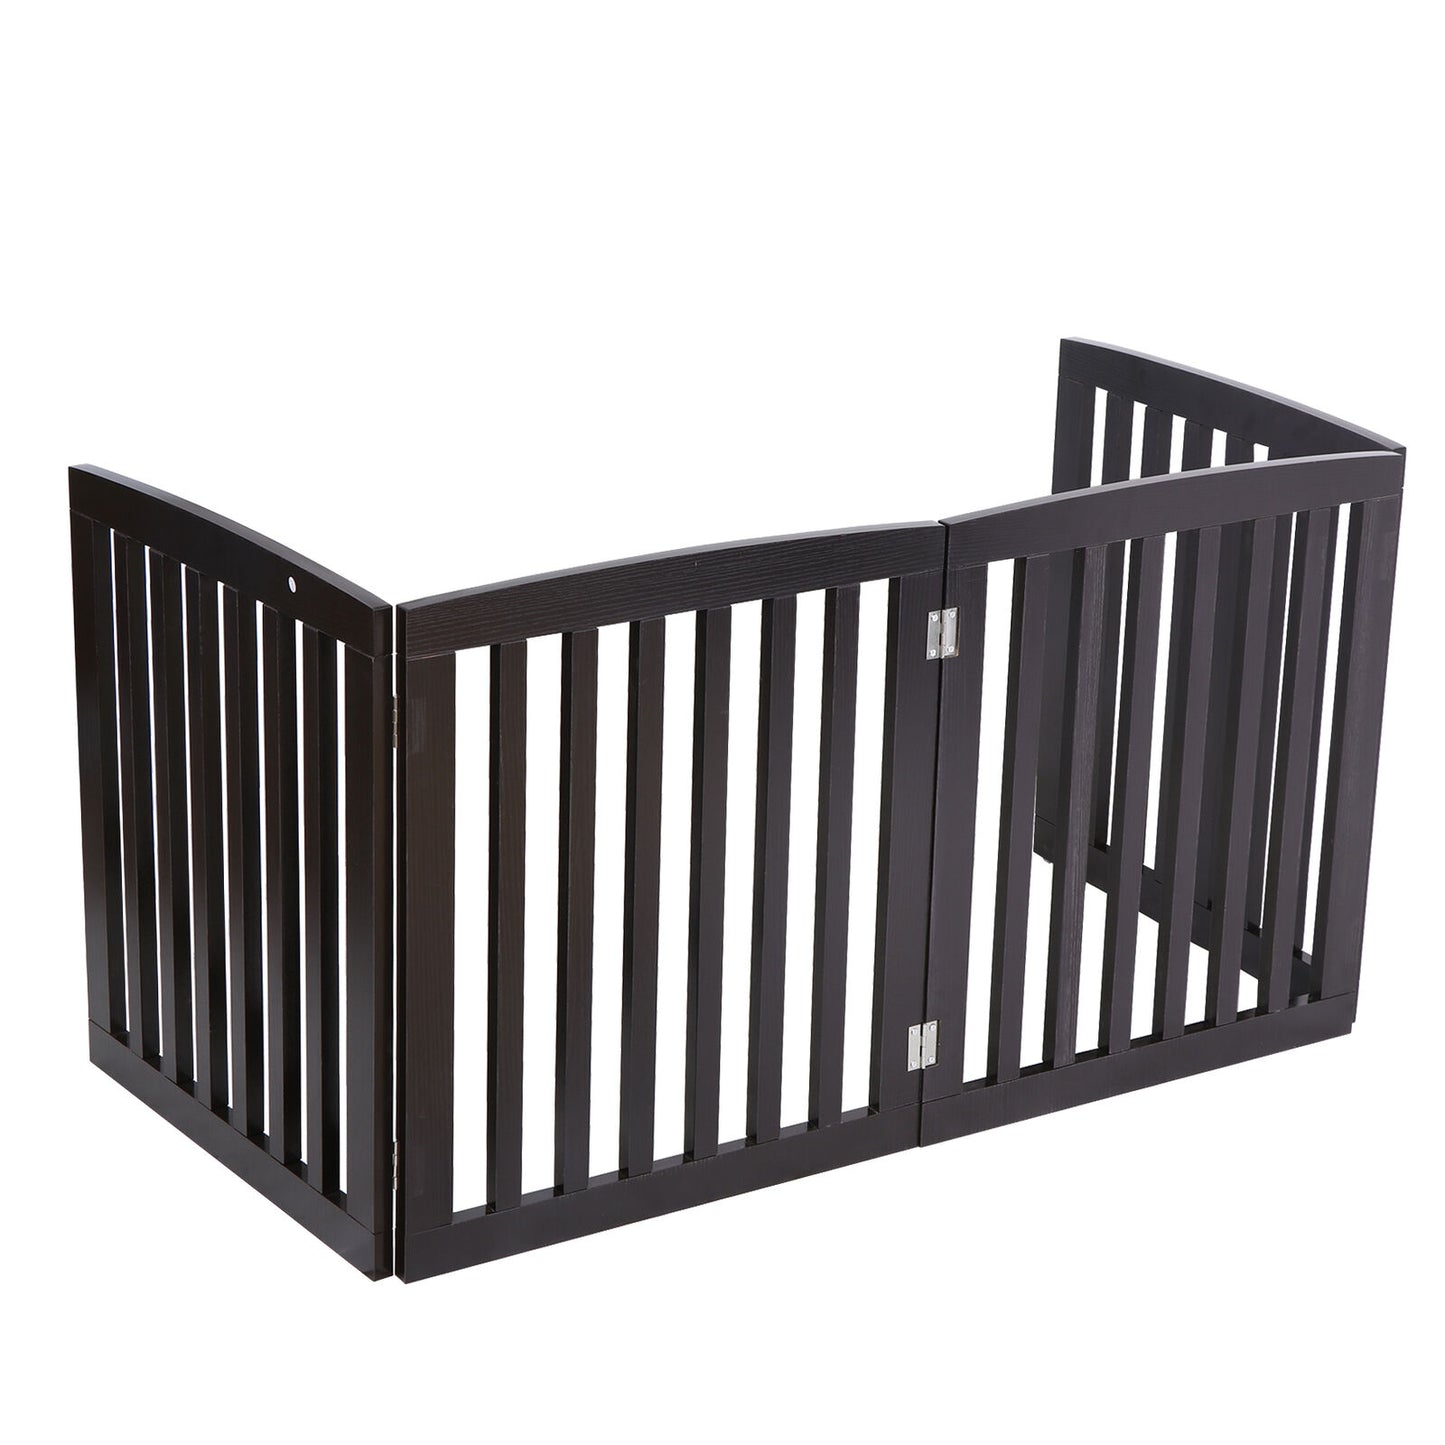 24 inch 4 Panels Fence Dog Gate Freestanding Foldable Step Over for The Doorway